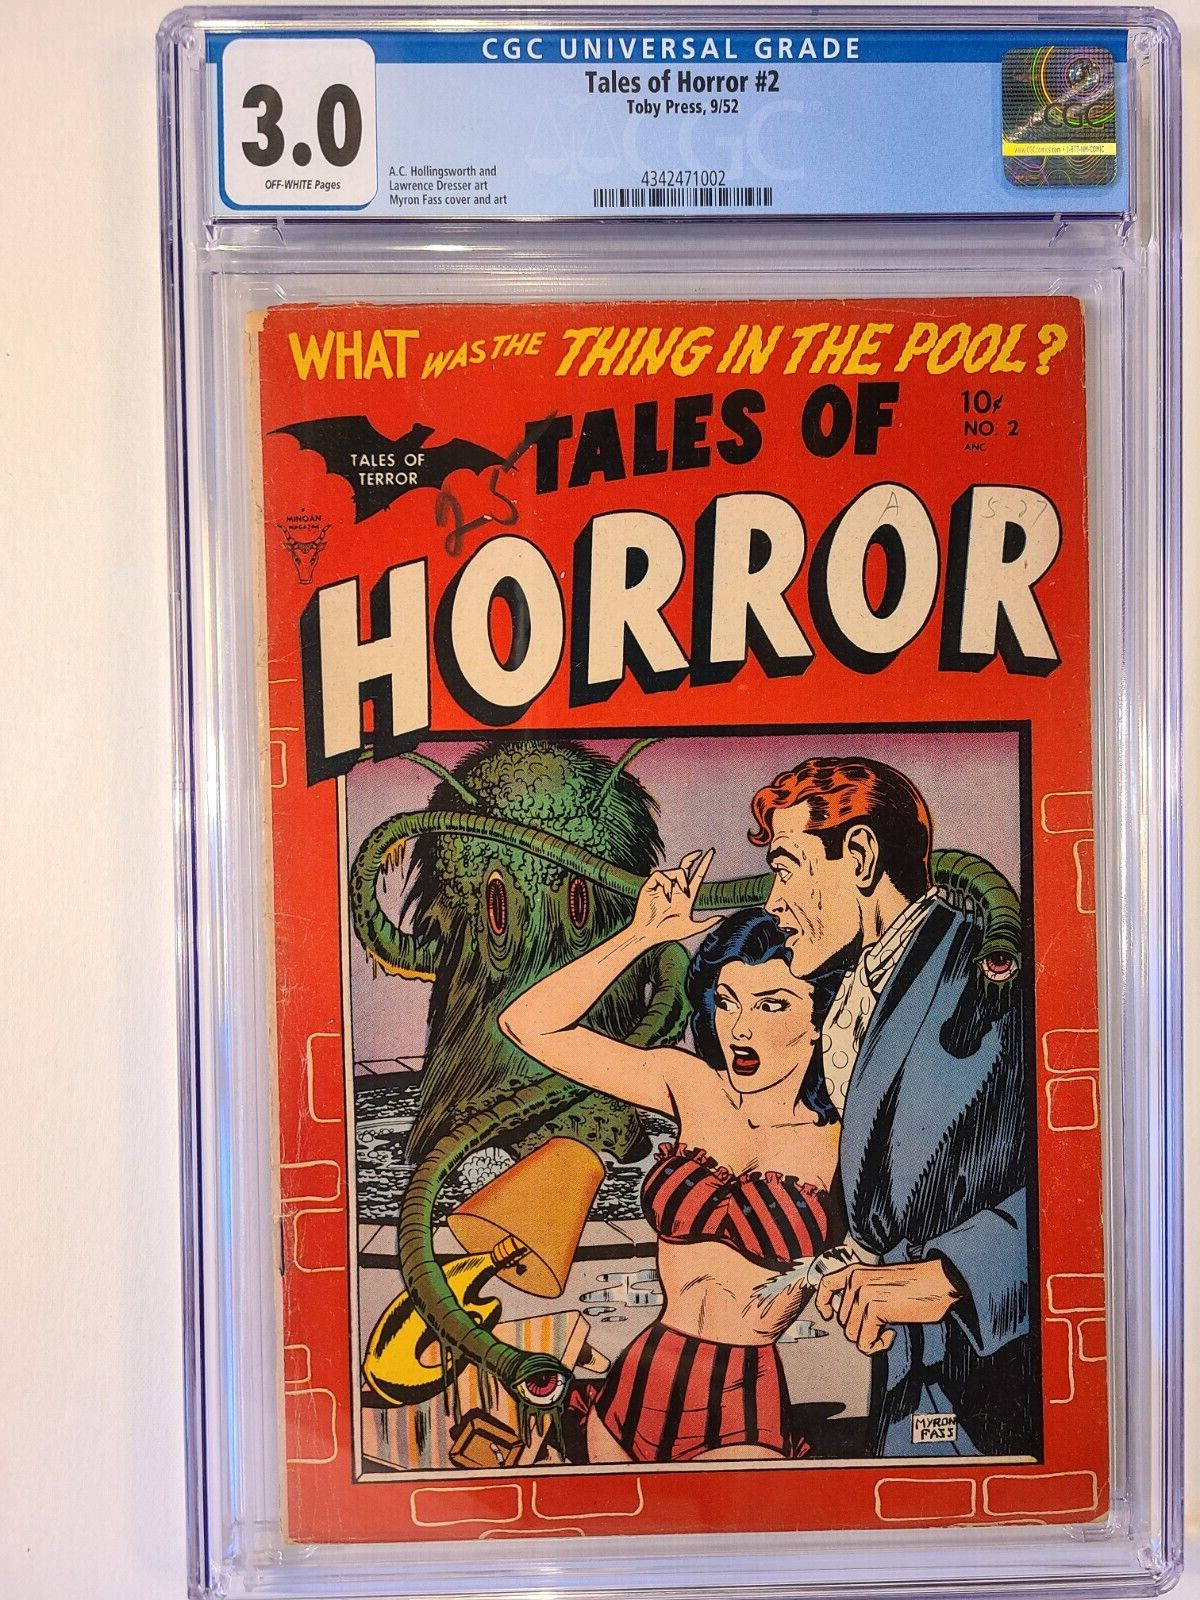 TALES OF HORROR # 2 TOBY PRESS 1952 CGC 3.0 GOOD GIRL COVER